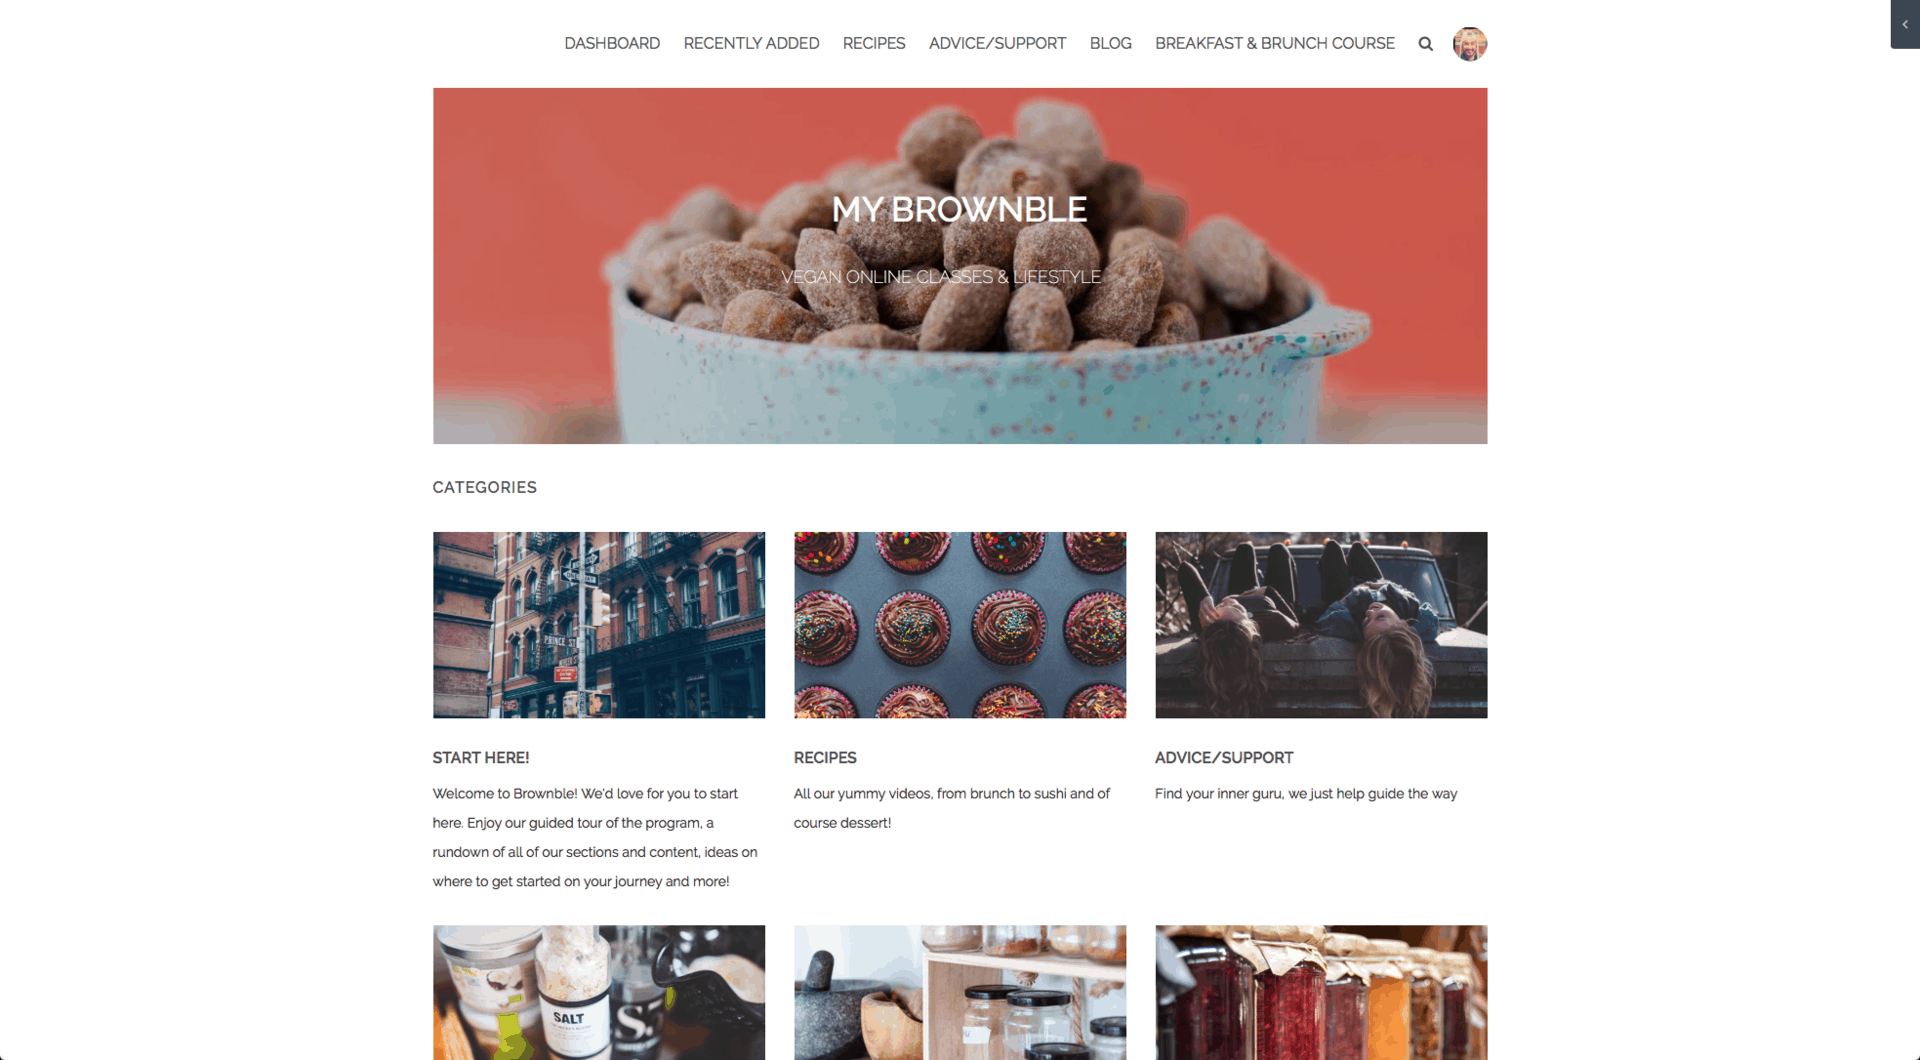 Screenshot of Brownble site showing blue bowl containing snacks